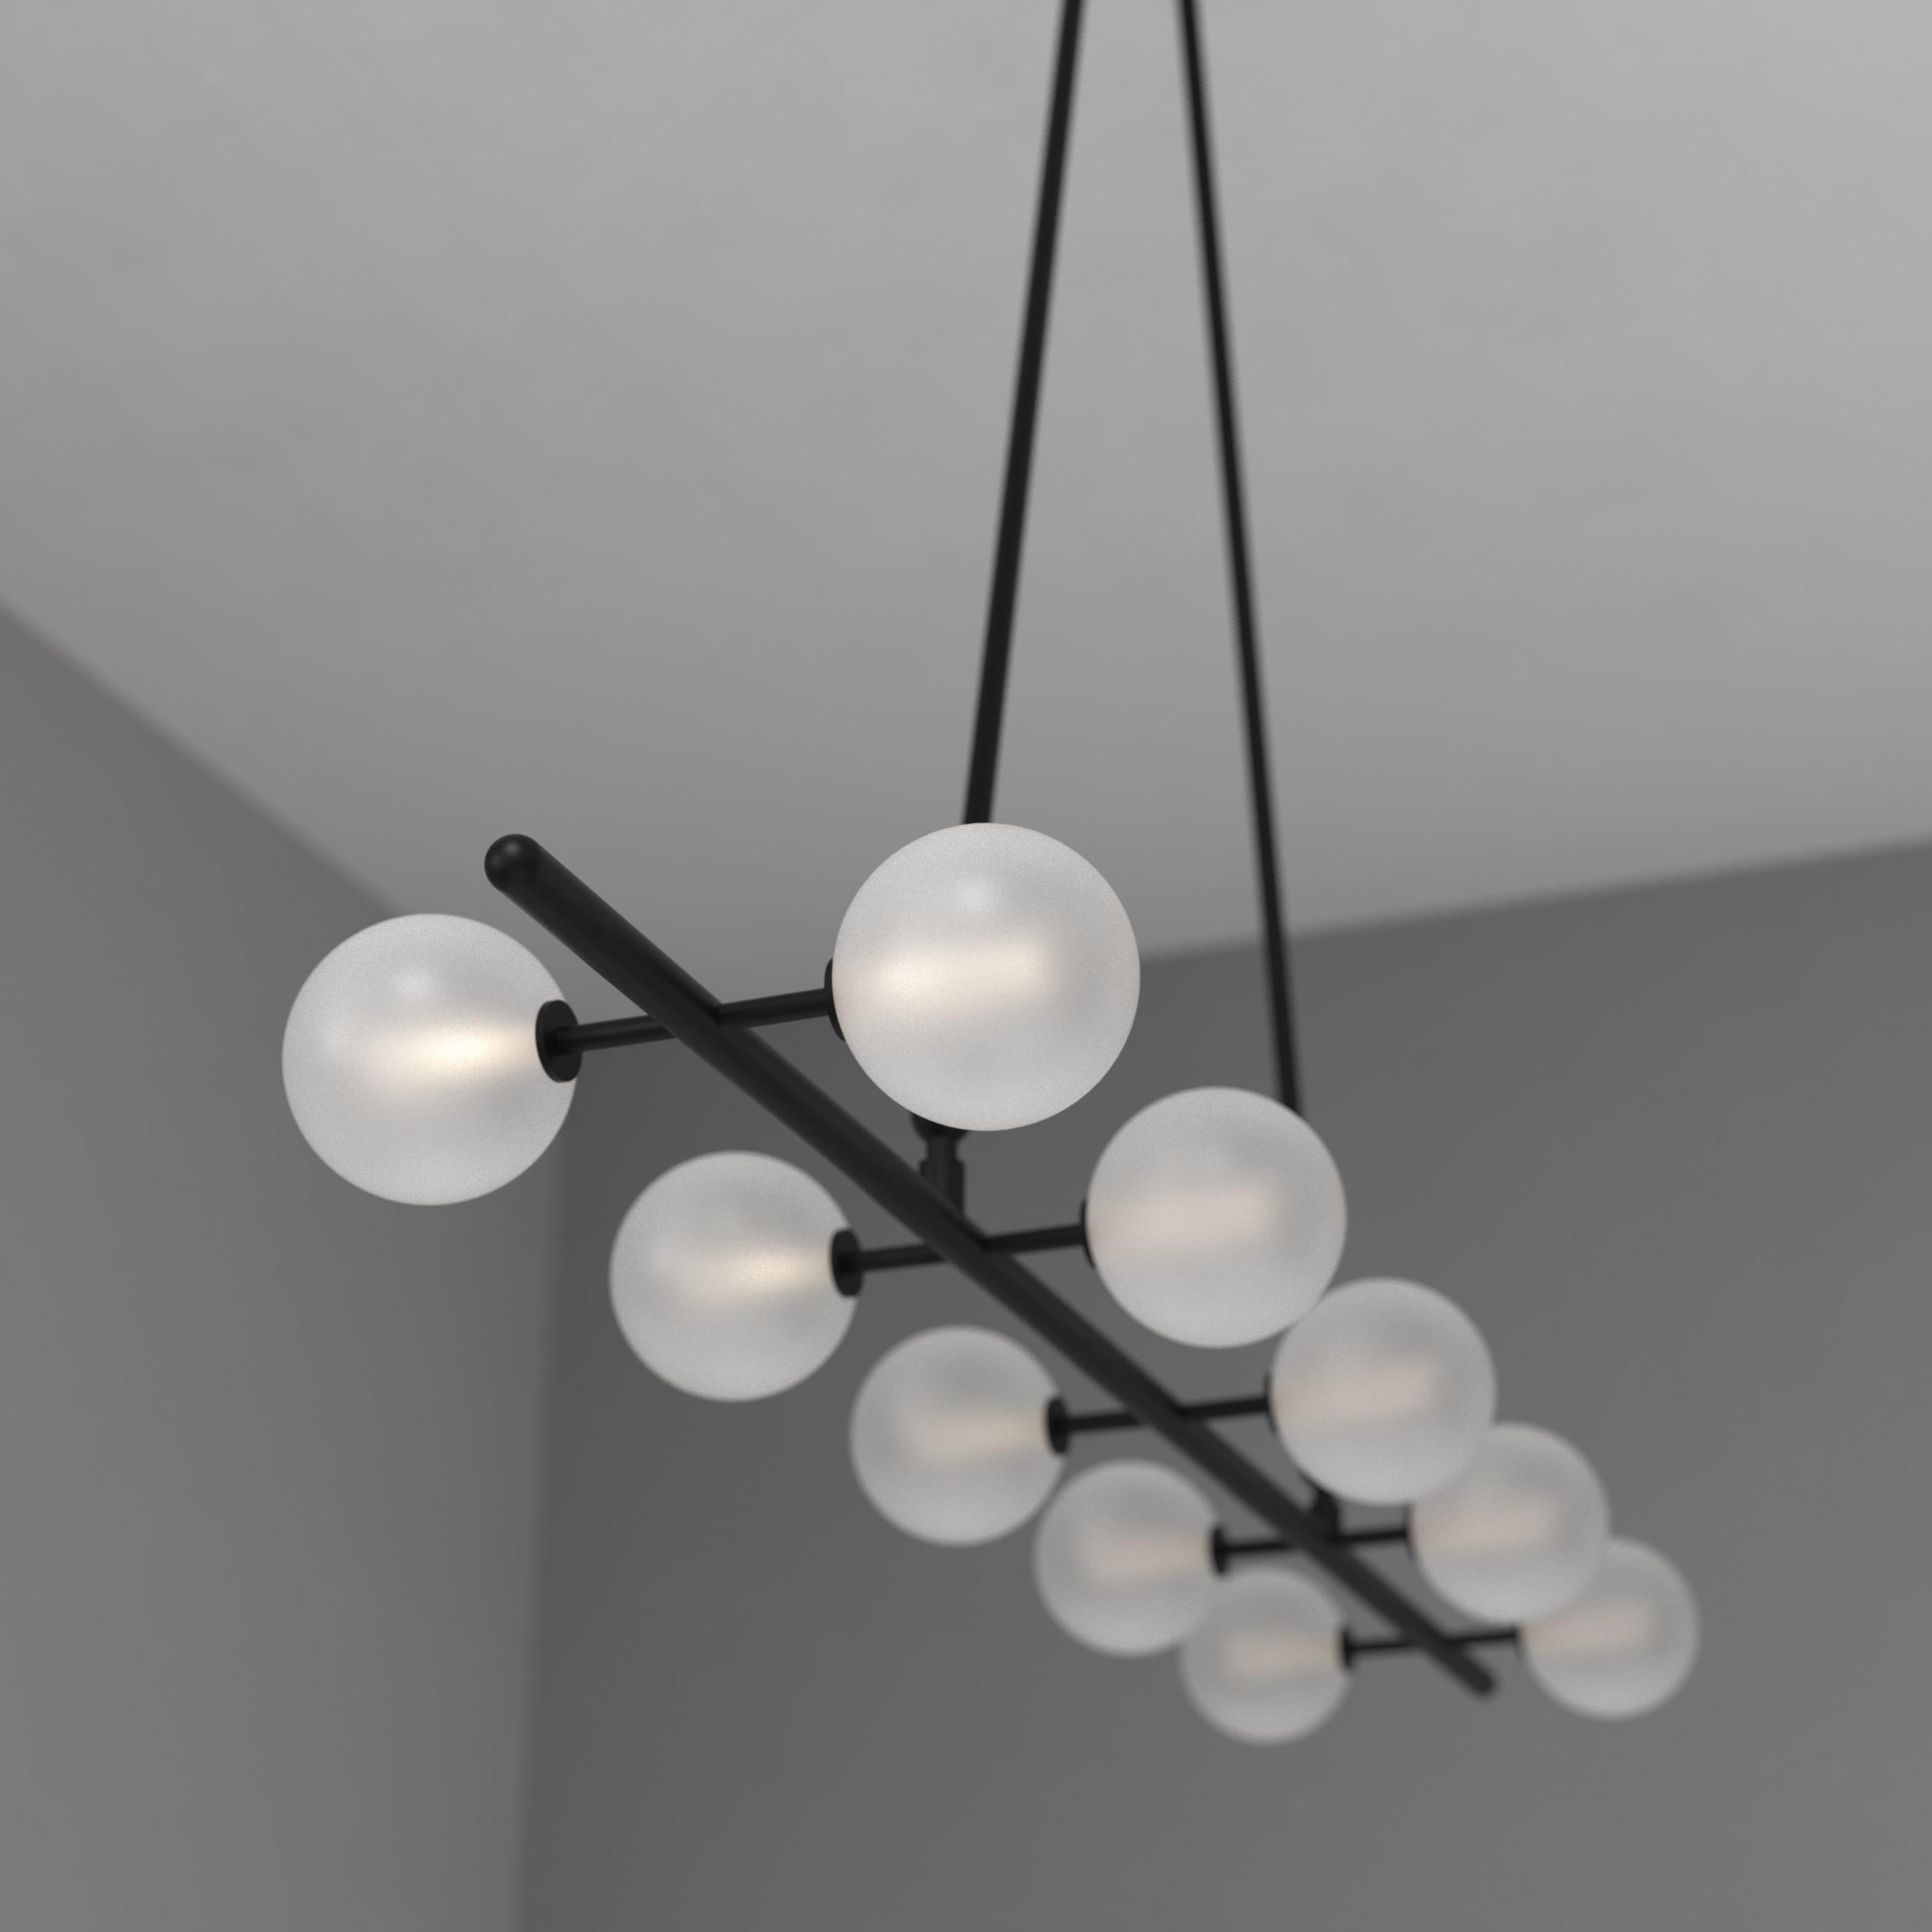 The Bisou Ceiling fixture is a captivating centerpiece that creates a naturally stunning focal point. Its sleek and minimalist frame complements the warm and inviting glow emitted by its ten handcrafted blown glass globes. Designed to compliment our